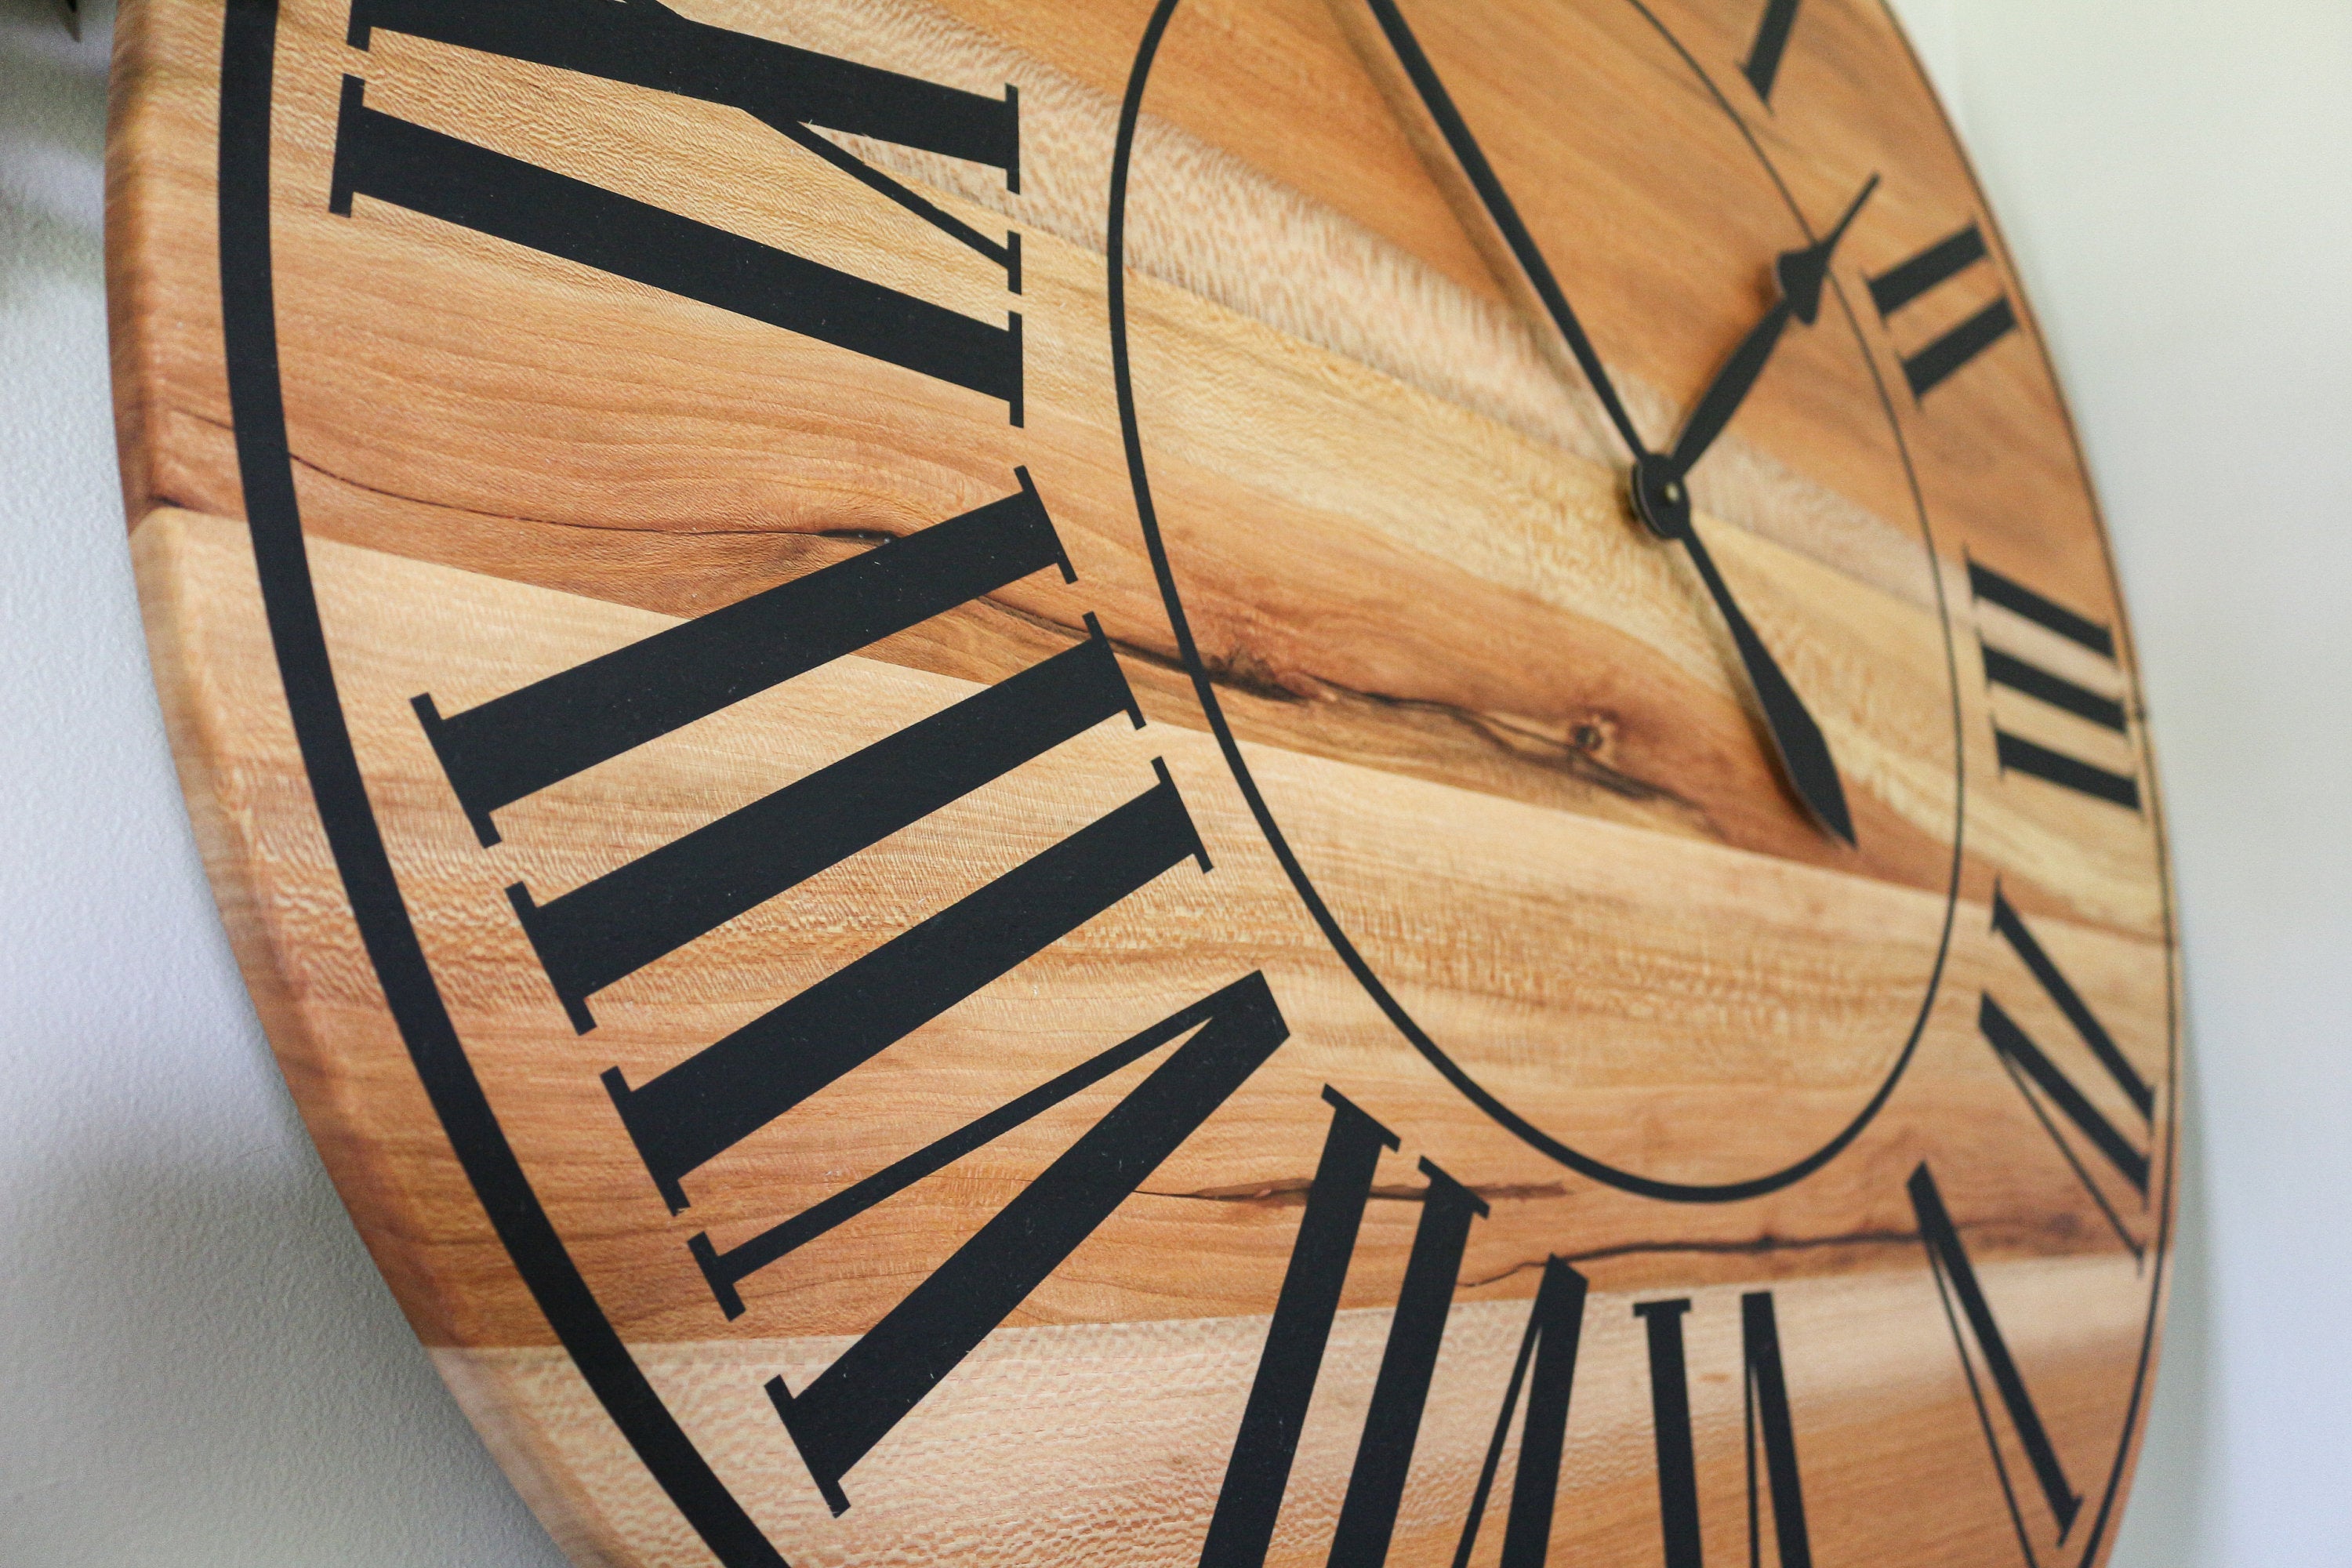 Large Quartersawn Sycamore Hardwood Wall Clock with Black Roman Numerals